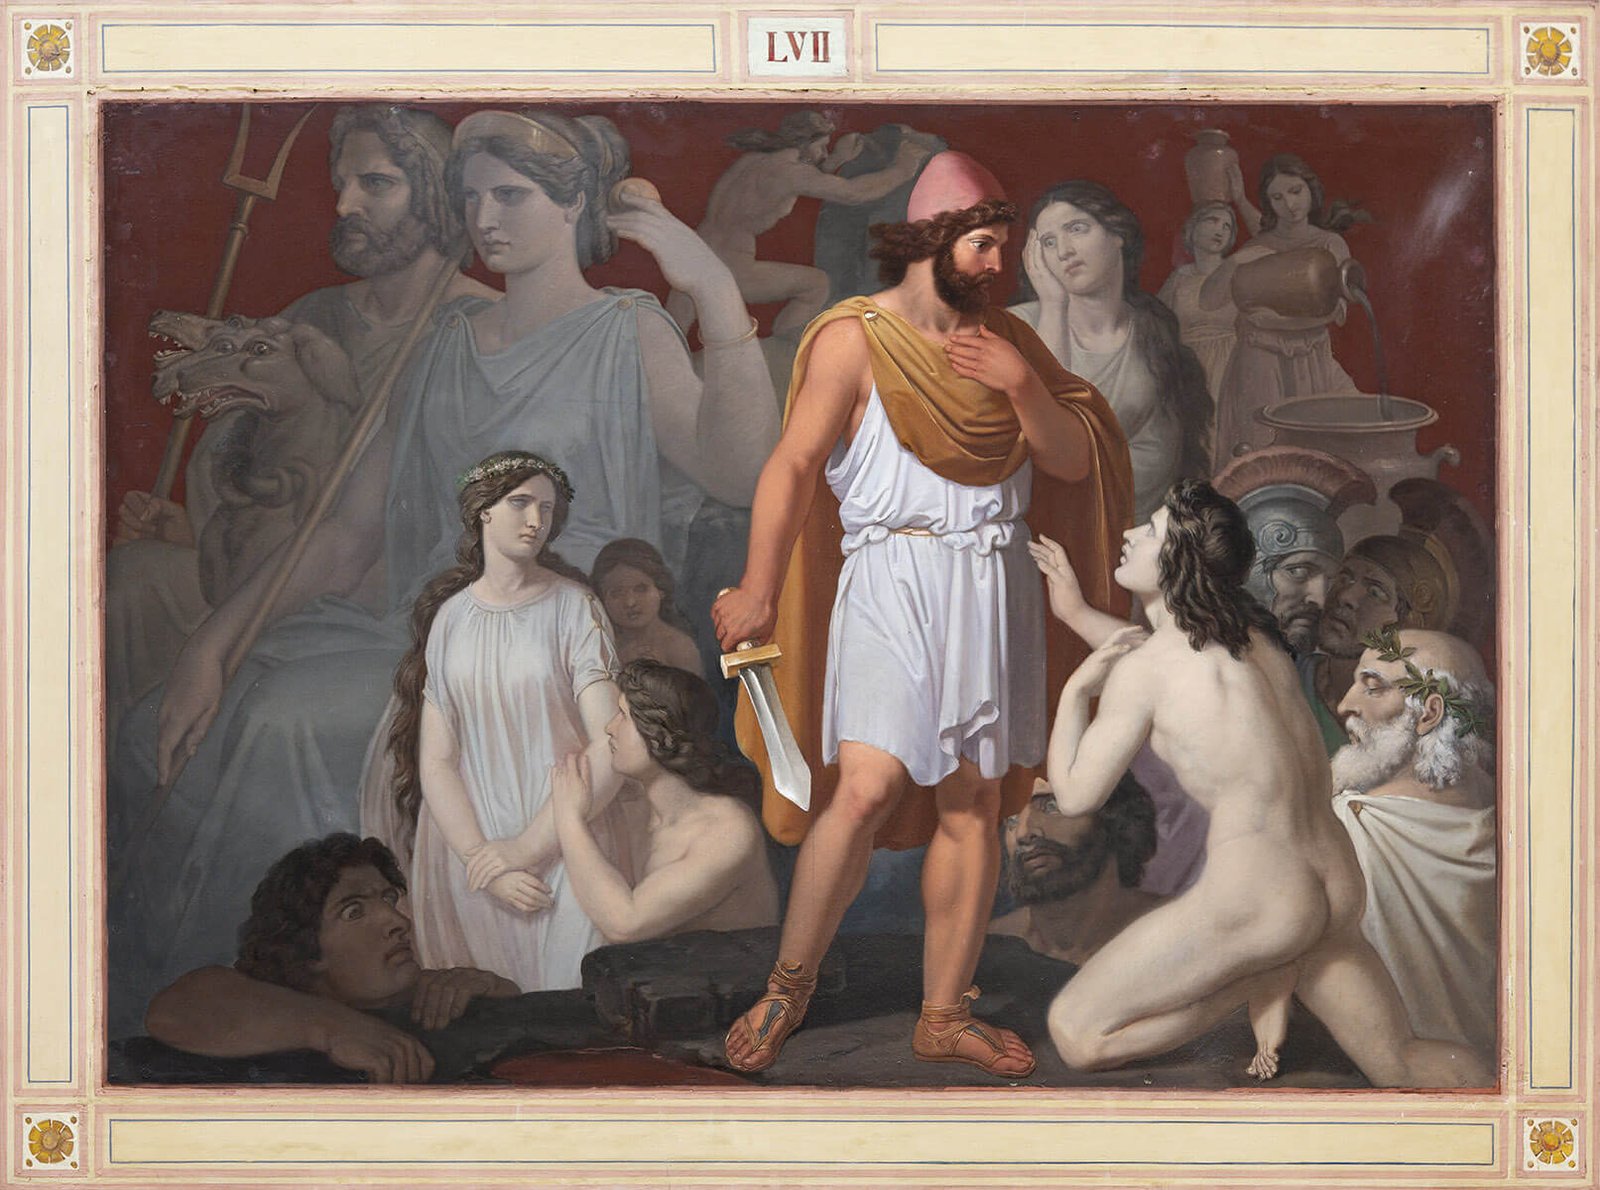 This wall painting represents Odysseus with his sword, meeting the dead in the underworld.